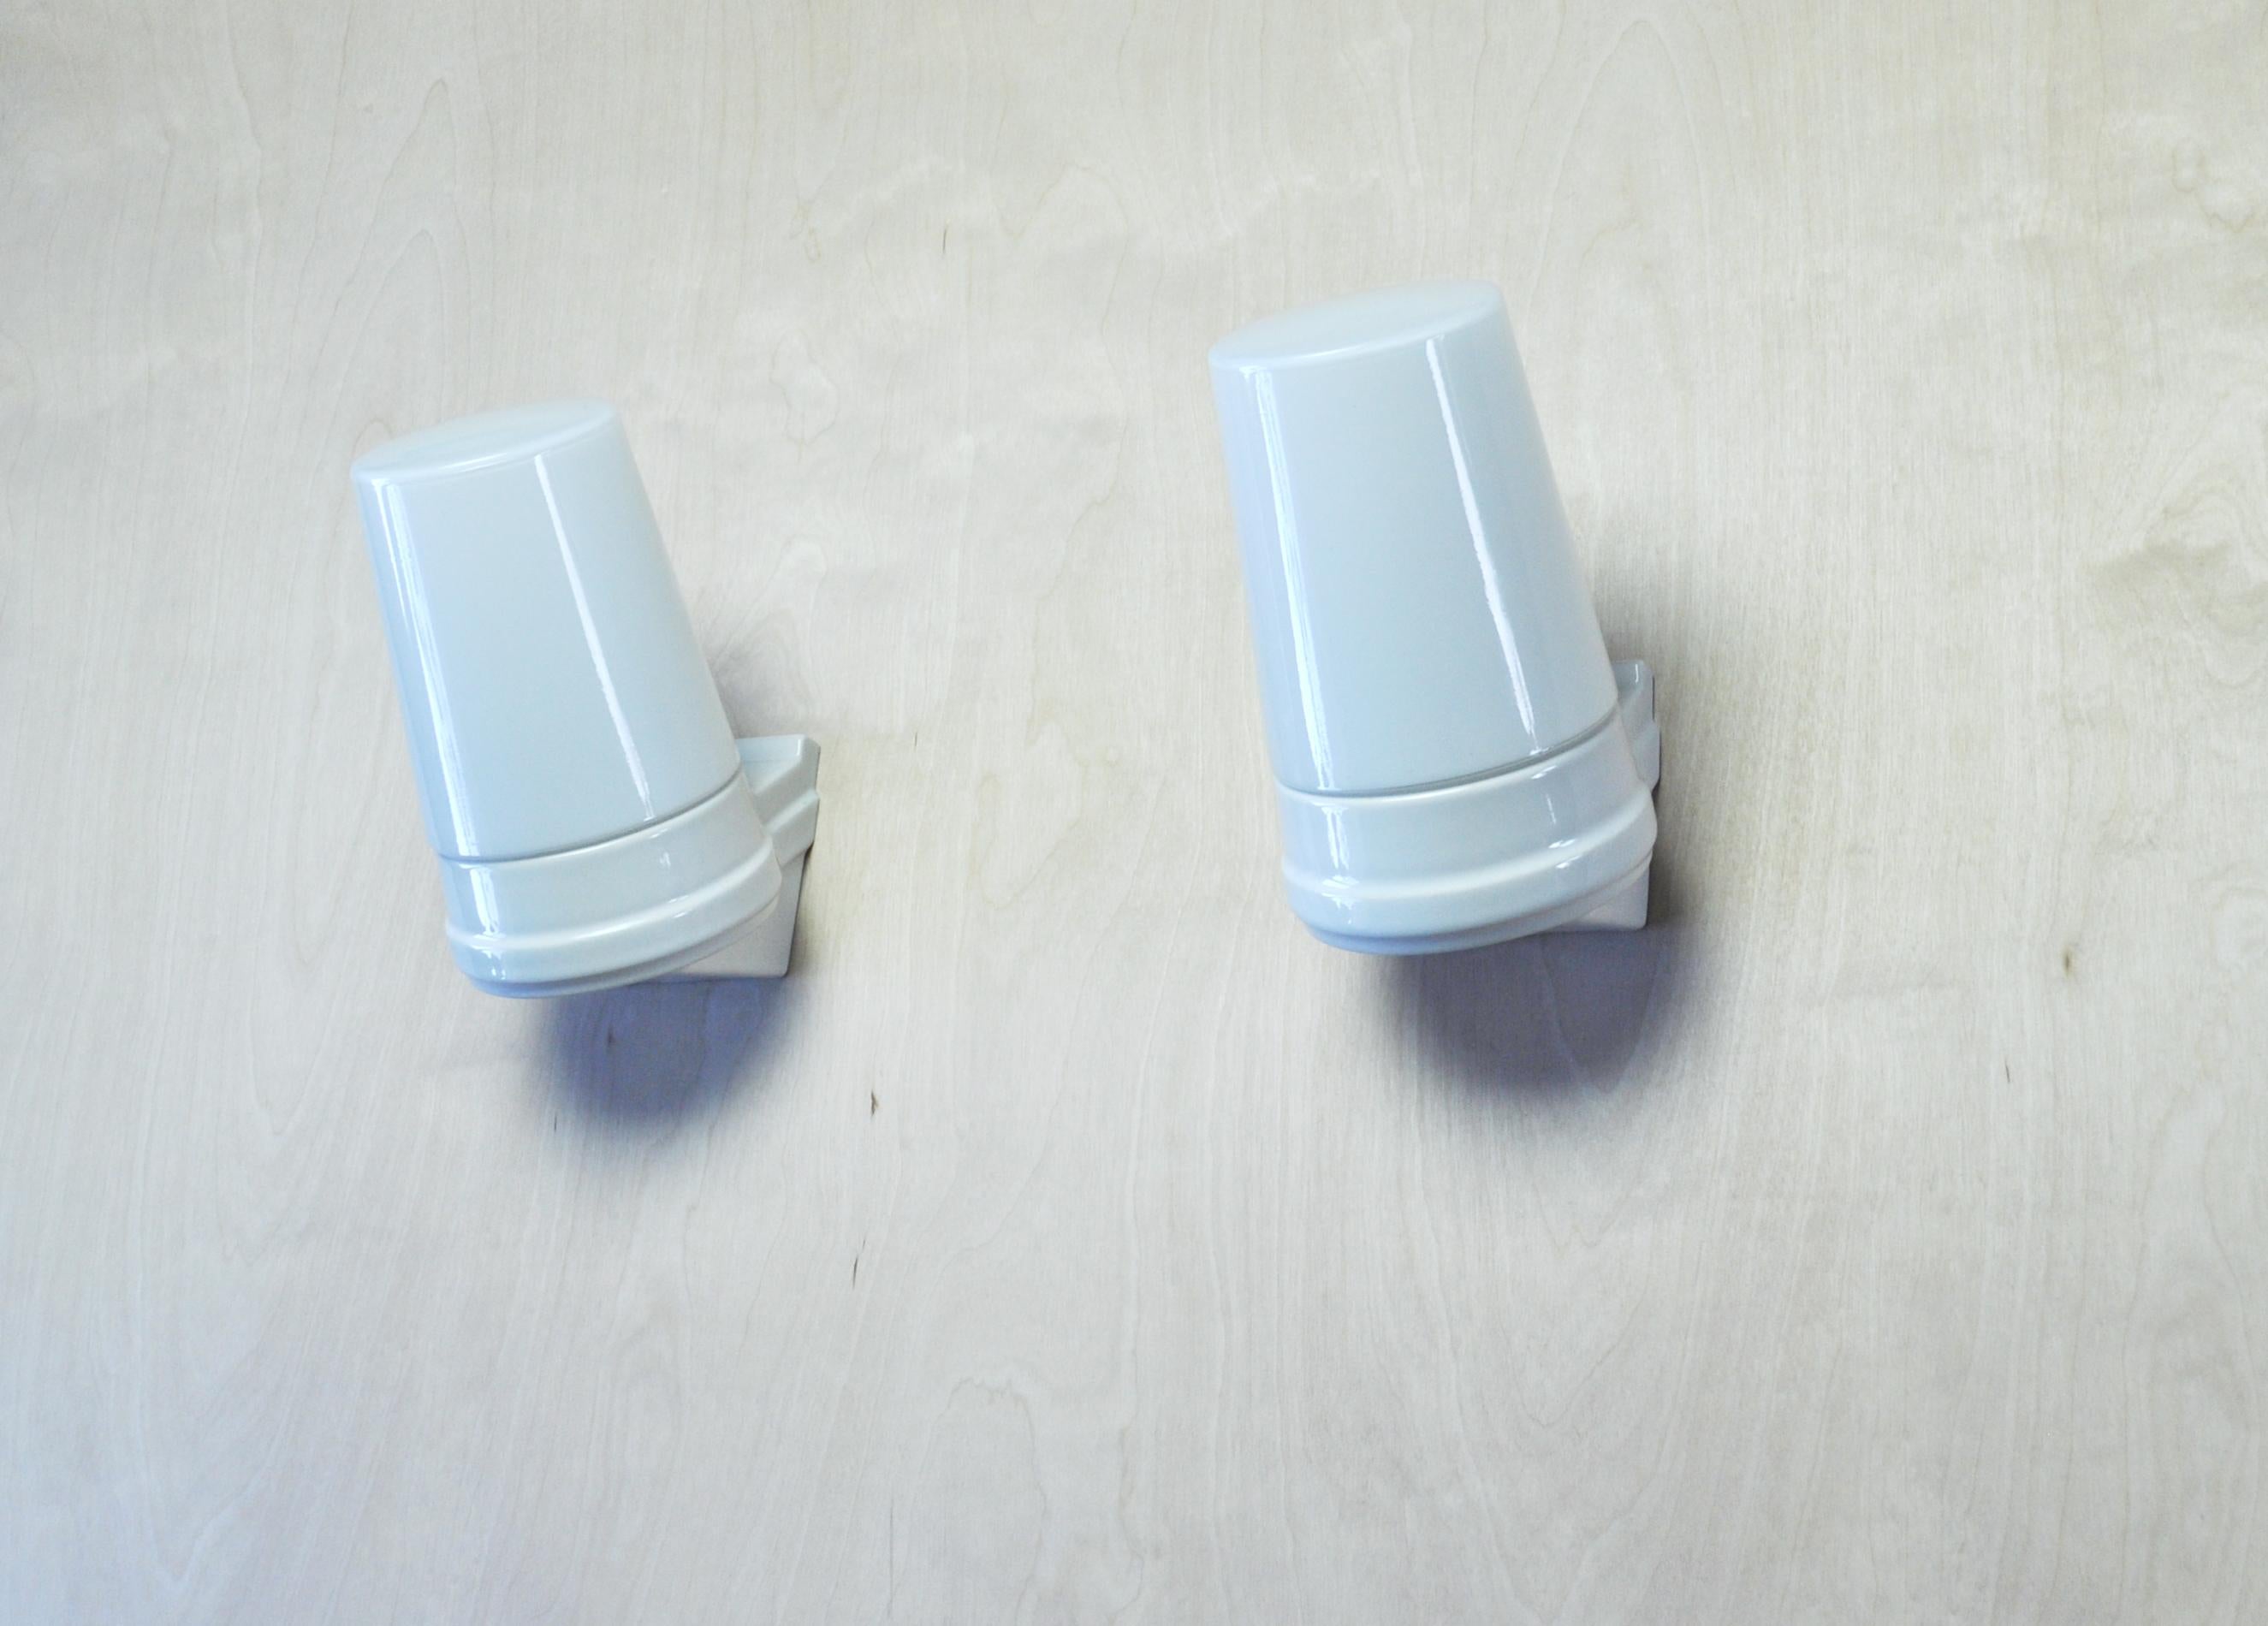 Set of 2 large Scandinavian Modern white glazed porcelain combined with two milky white opaline glass design by Sigvard Bernadotte for IFÖ, Sweden 1960s. 
Light source: E27 Edison screw fitting max 75W. Made for wet areas such as bathrooms, but